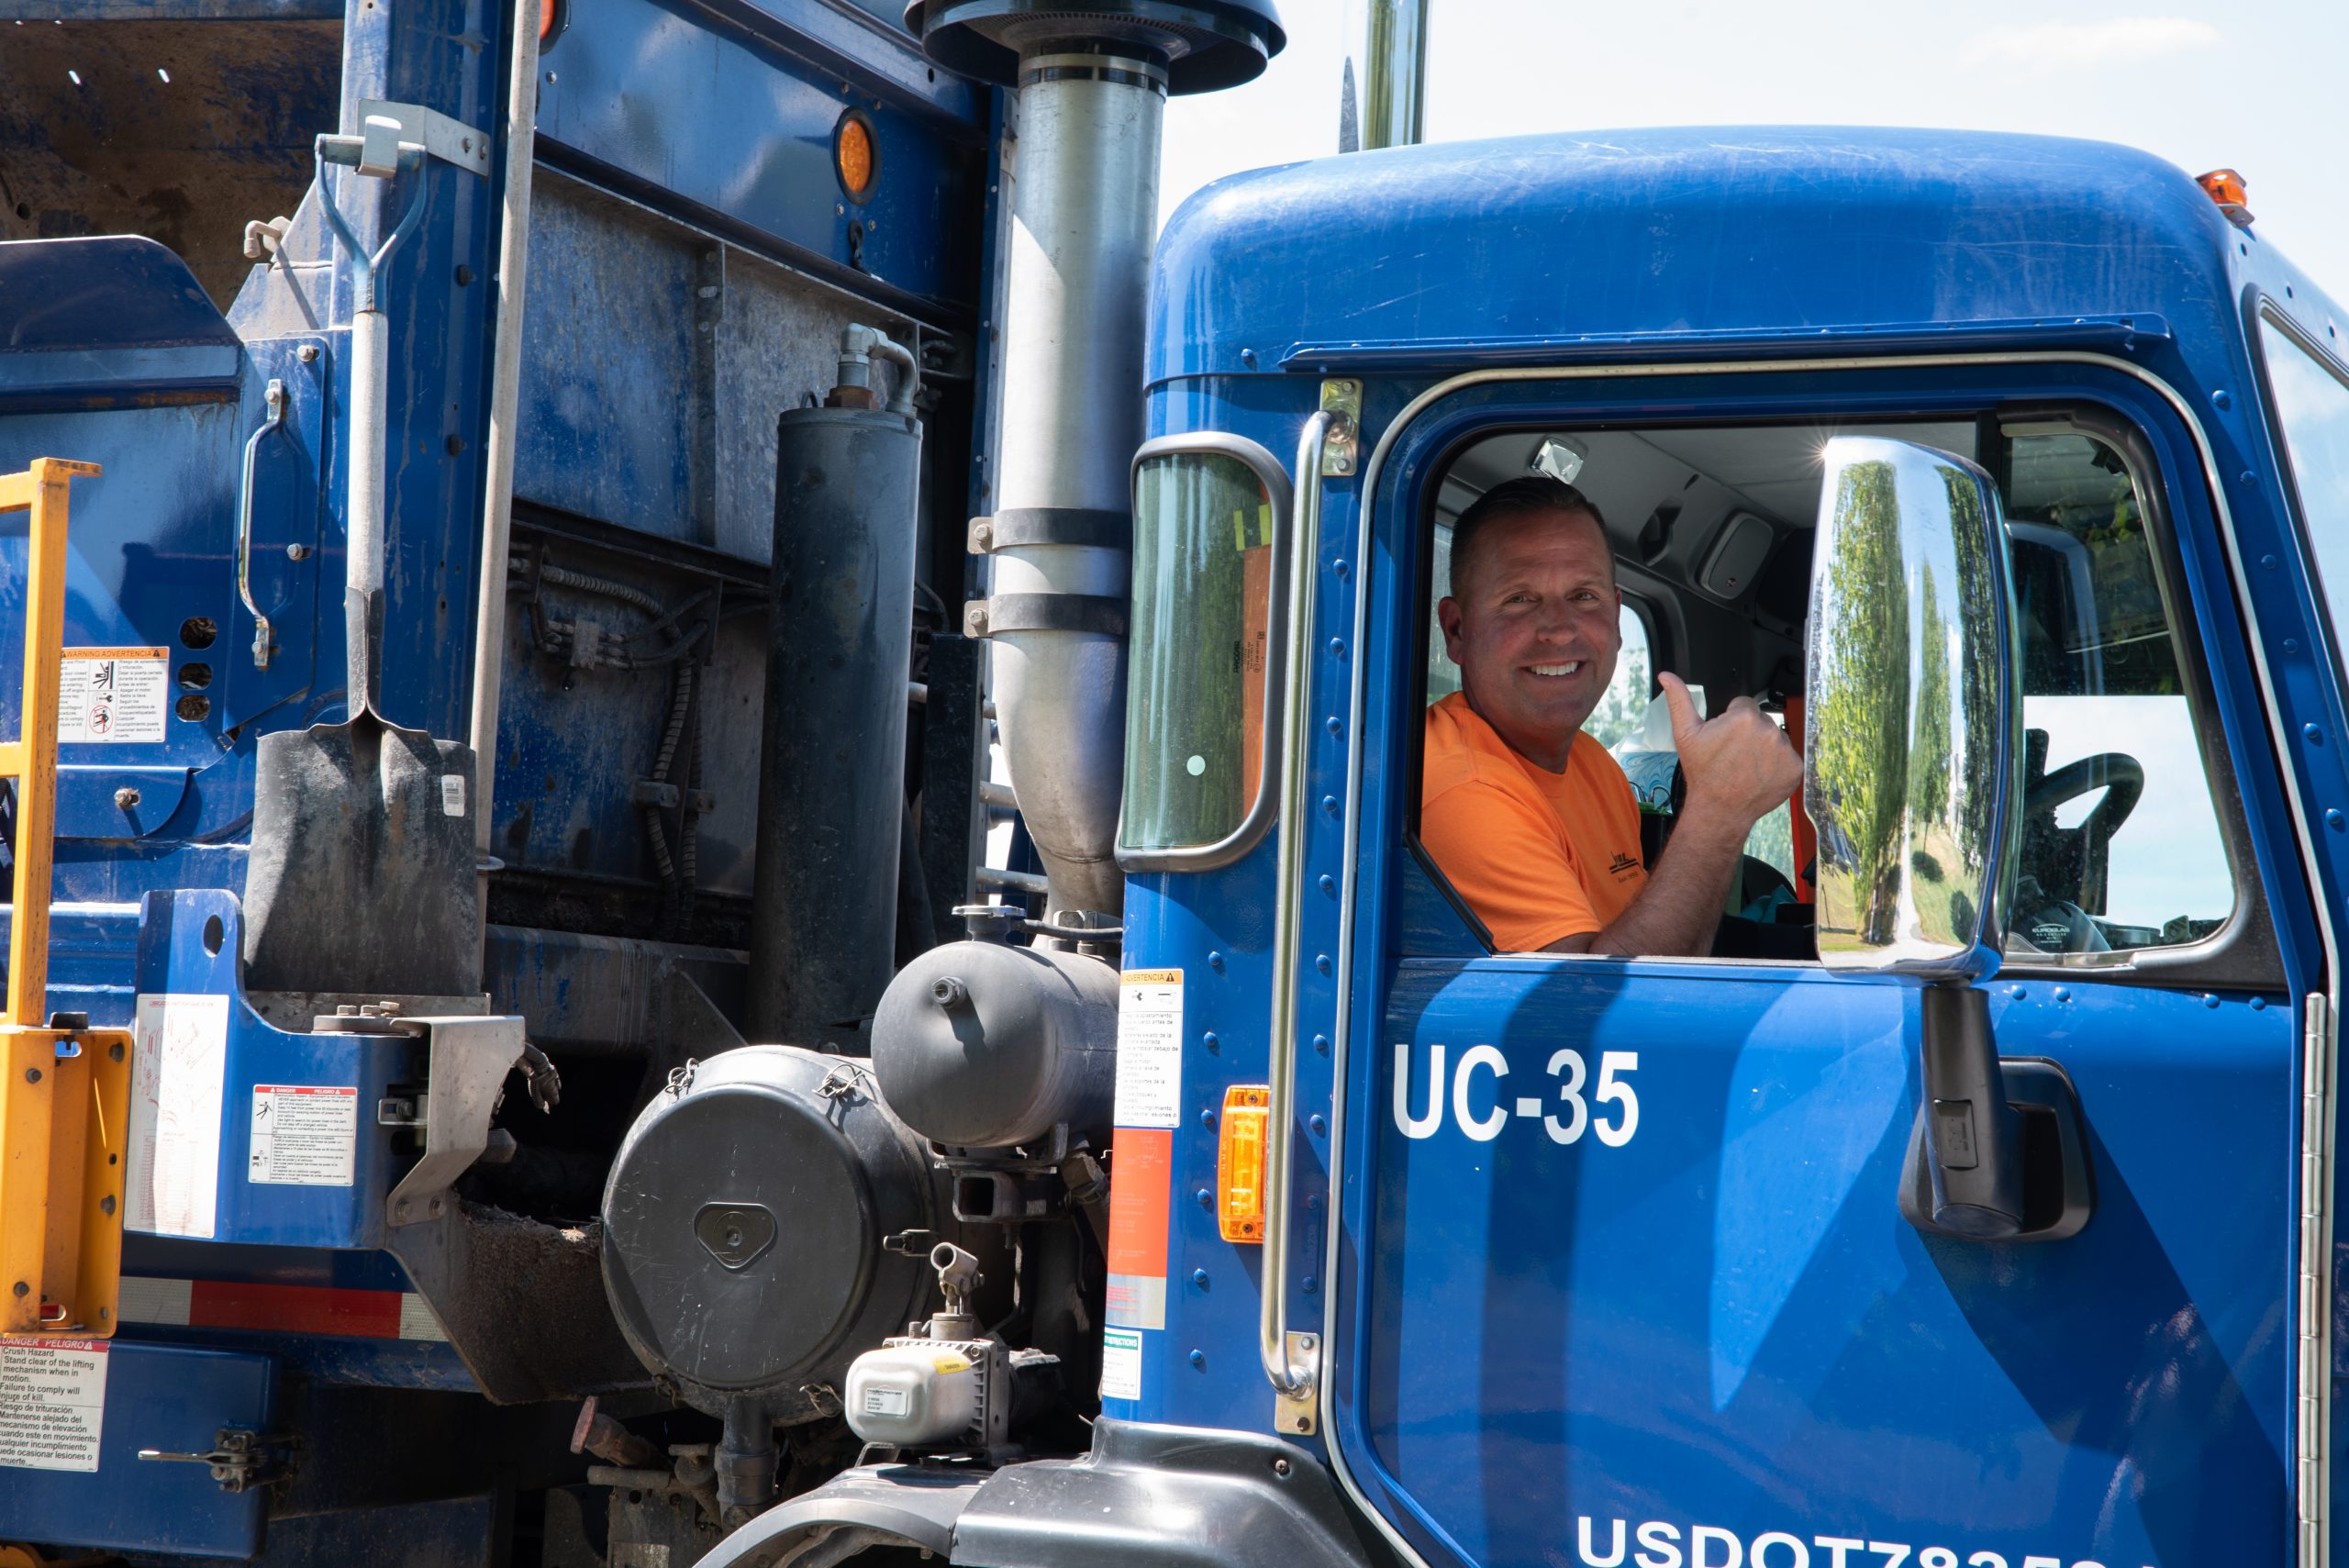 Male employee sitting in blue sanitation truck while smiling and giving thumbs up